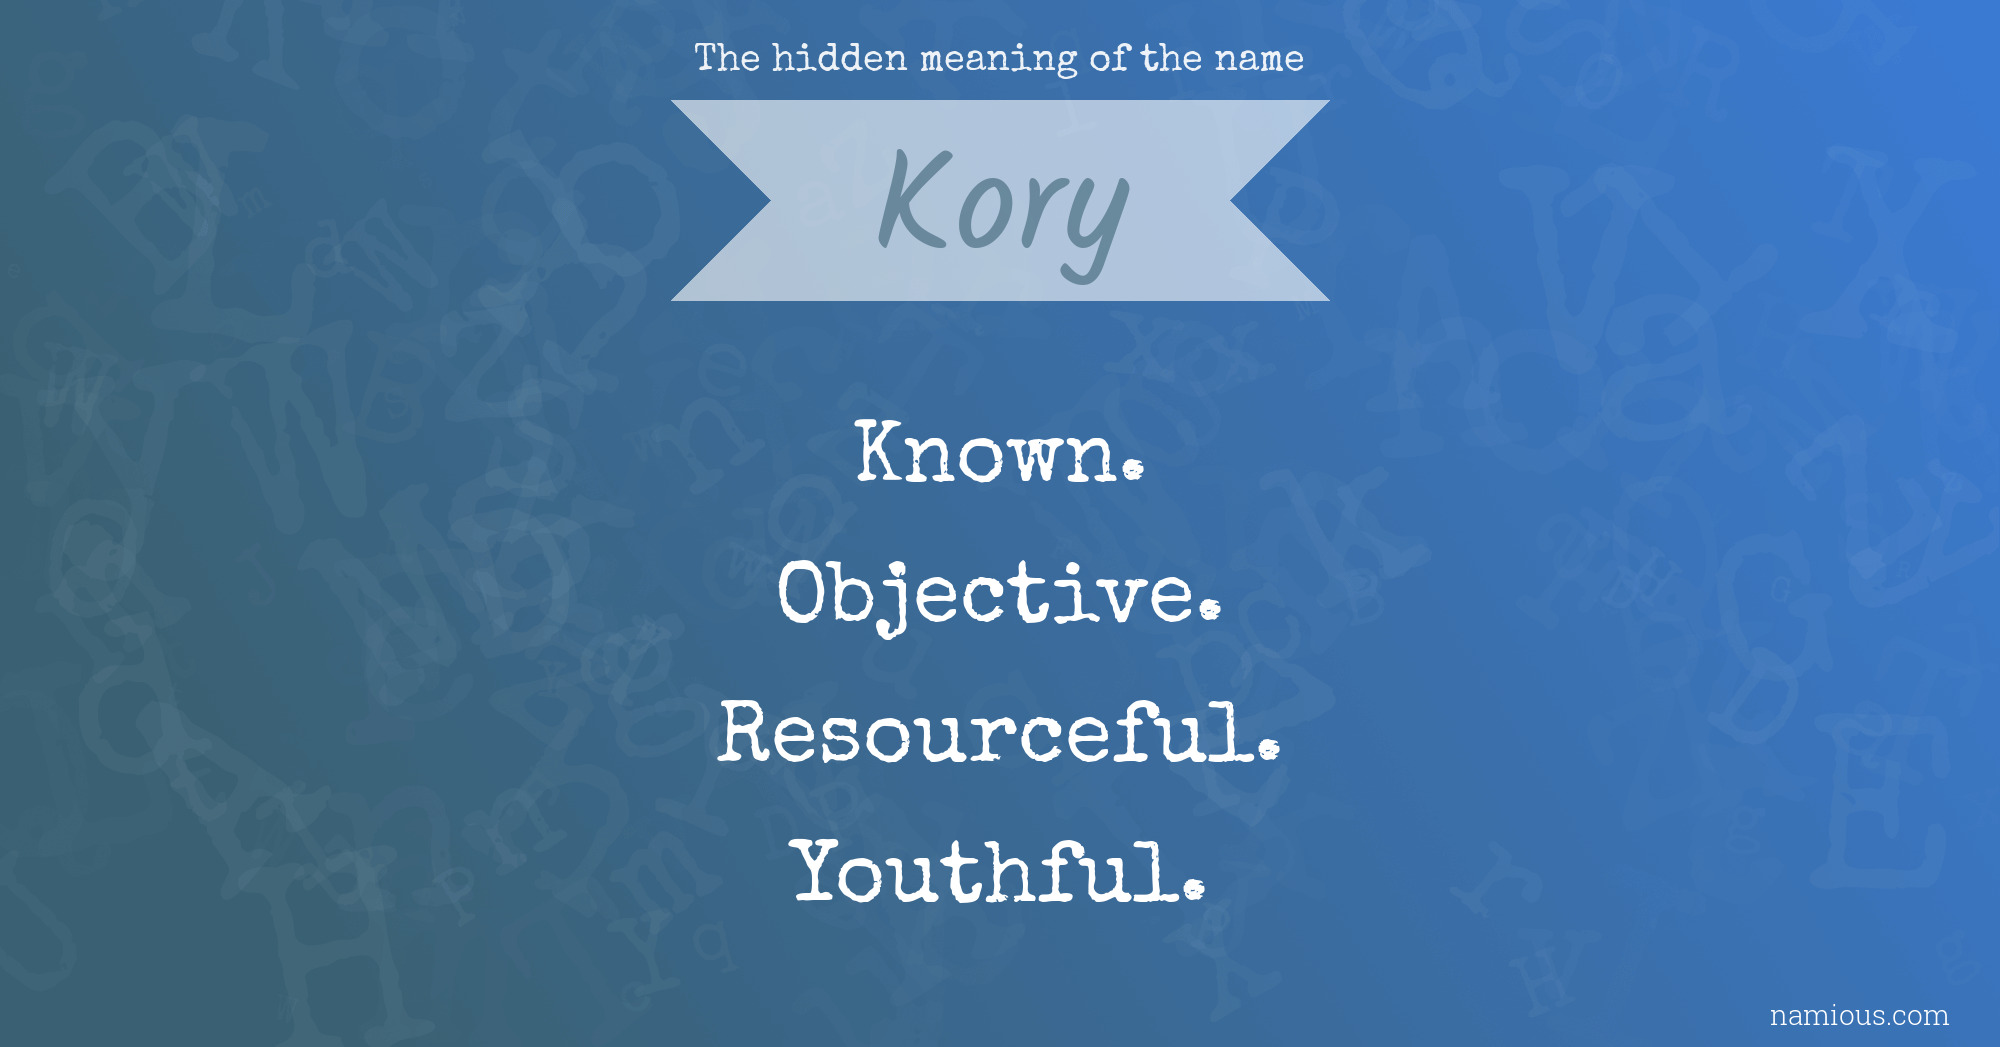 The hidden meaning of the name Kory